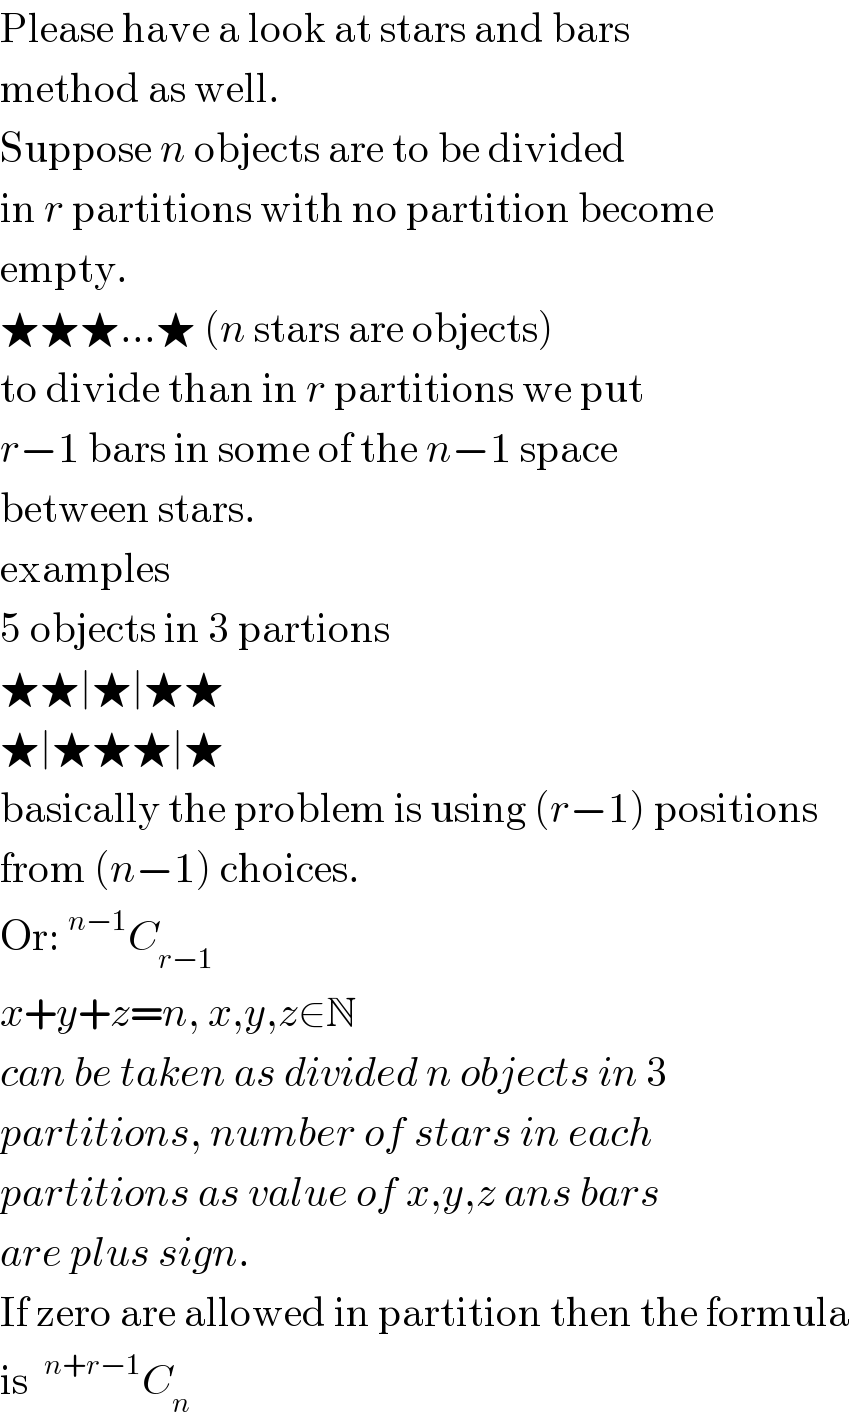 Please have a look at stars and bars  method as well.  Suppose n objects are to be divided  in r partitions with no partition become  empty.  ★★★...★ (n stars are objects)  to divide than in r partitions we put  r−1 bars in some of the n−1 space  between stars.  examples  5 objects in 3 partions  ★★∣★∣★★  ★∣★★★∣★  basically the problem is using (r−1) positions  from (n−1) choices.  Or:^(n−1) C_(r−1)   x+y+z=n, x,y,z∈N  can be taken as divided n objects in 3  partitions, number of stars in each  partitions as value of x,y,z ans bars  are plus sign.  If zero are allowed in partition then the formula  is ^(n+r−1) C_n   